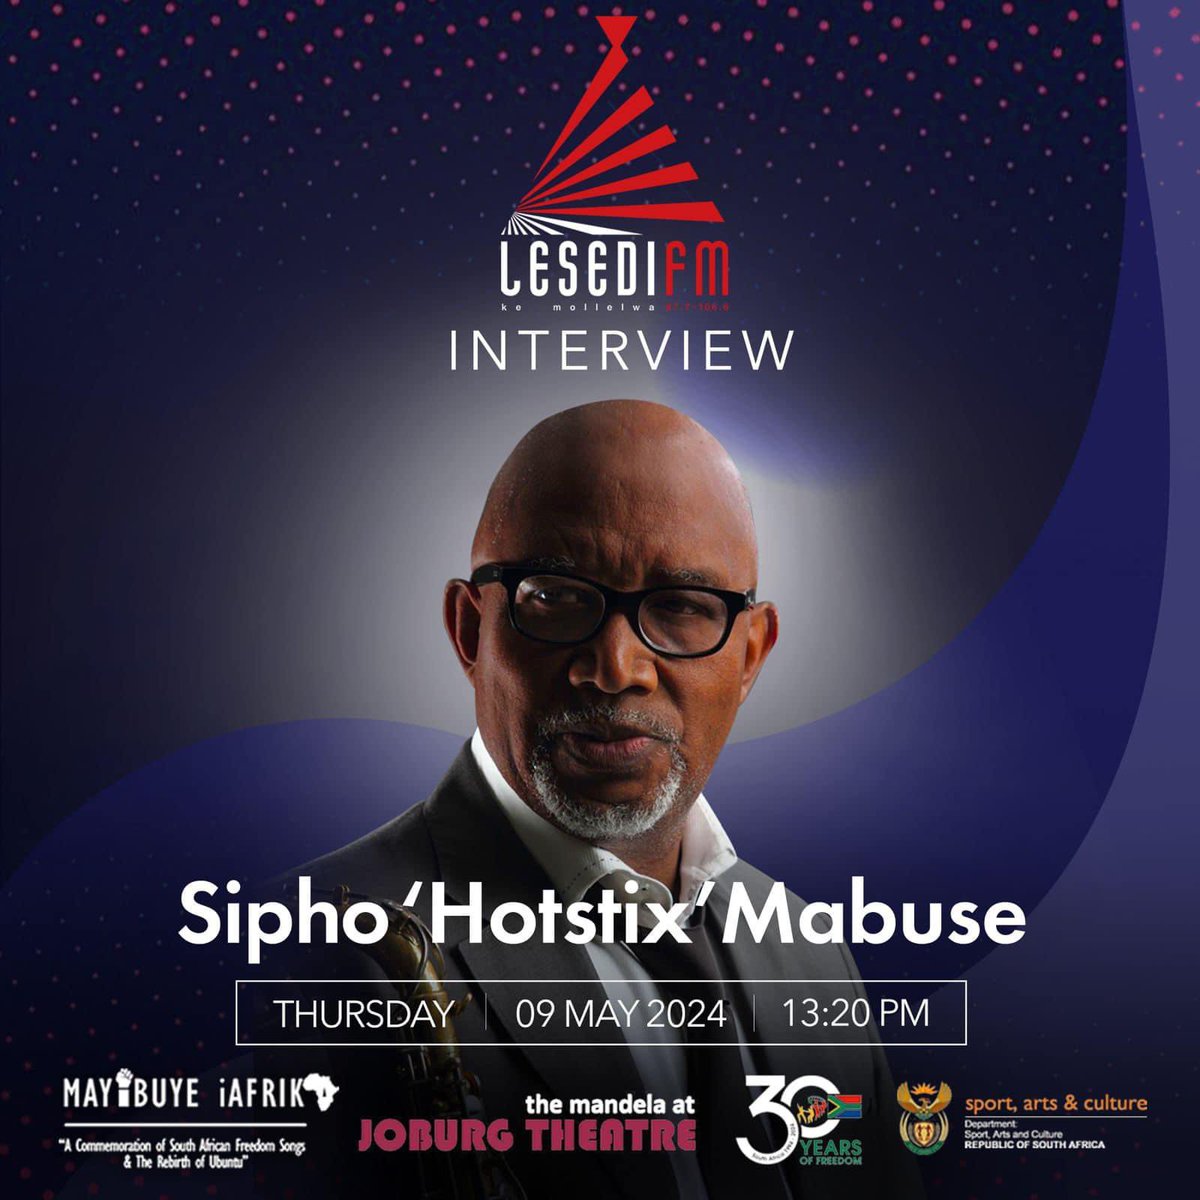 On @LesediFM today tune in please see poster @BillyMonama @joburgtheatre